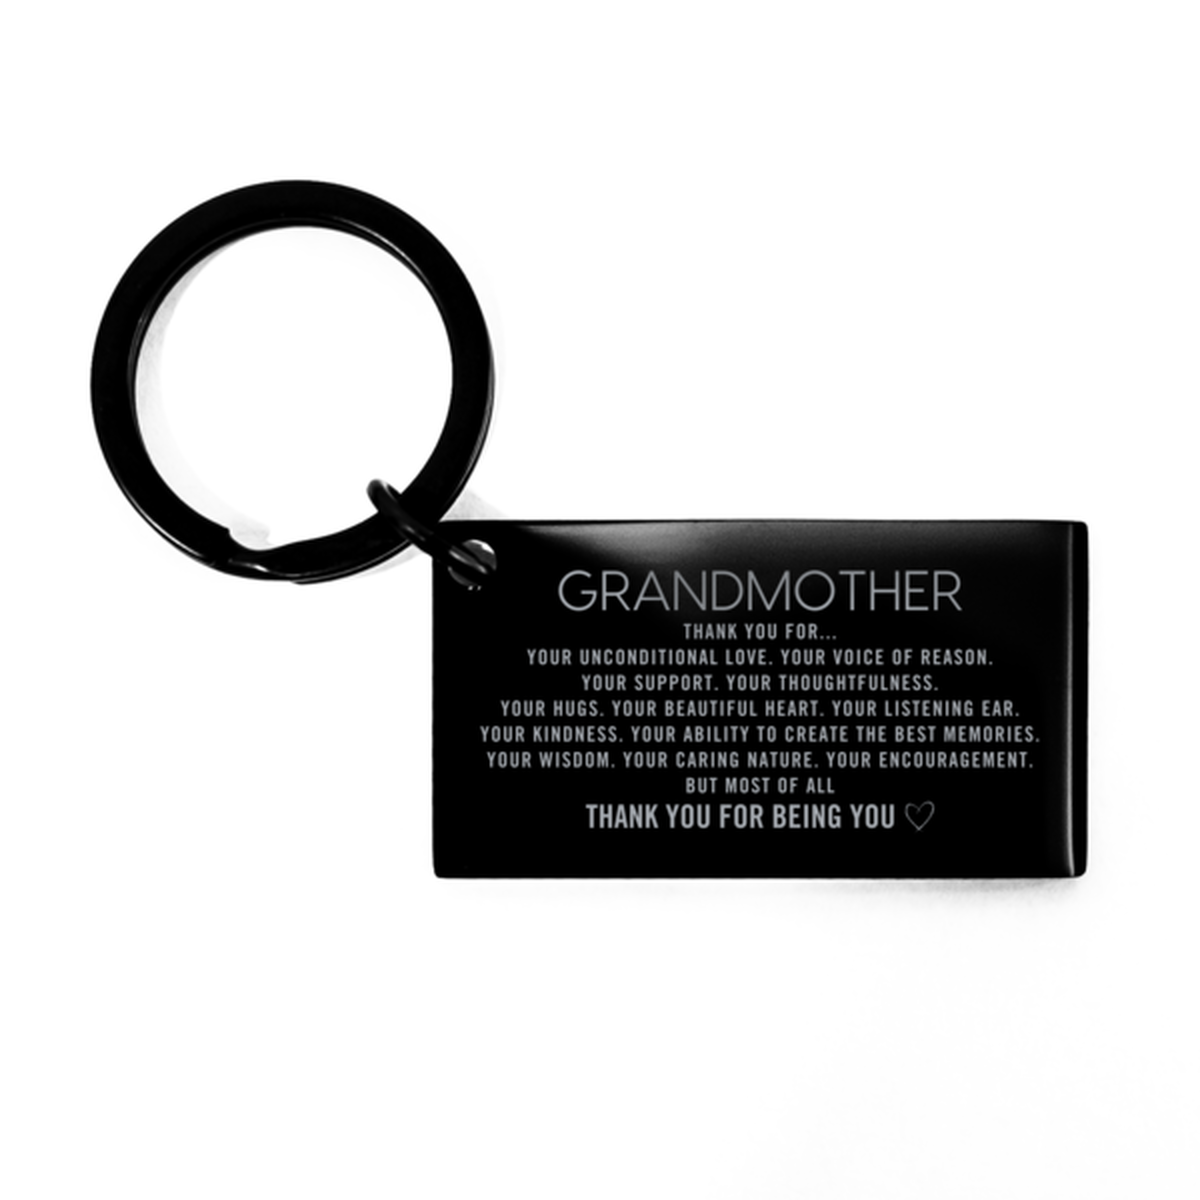 Grandmother Keychain Custom, Engraved Gifts For Grandmother Christmas Graduation Birthday Gifts for Men Women Grandmother Thank you for Your unconditional love